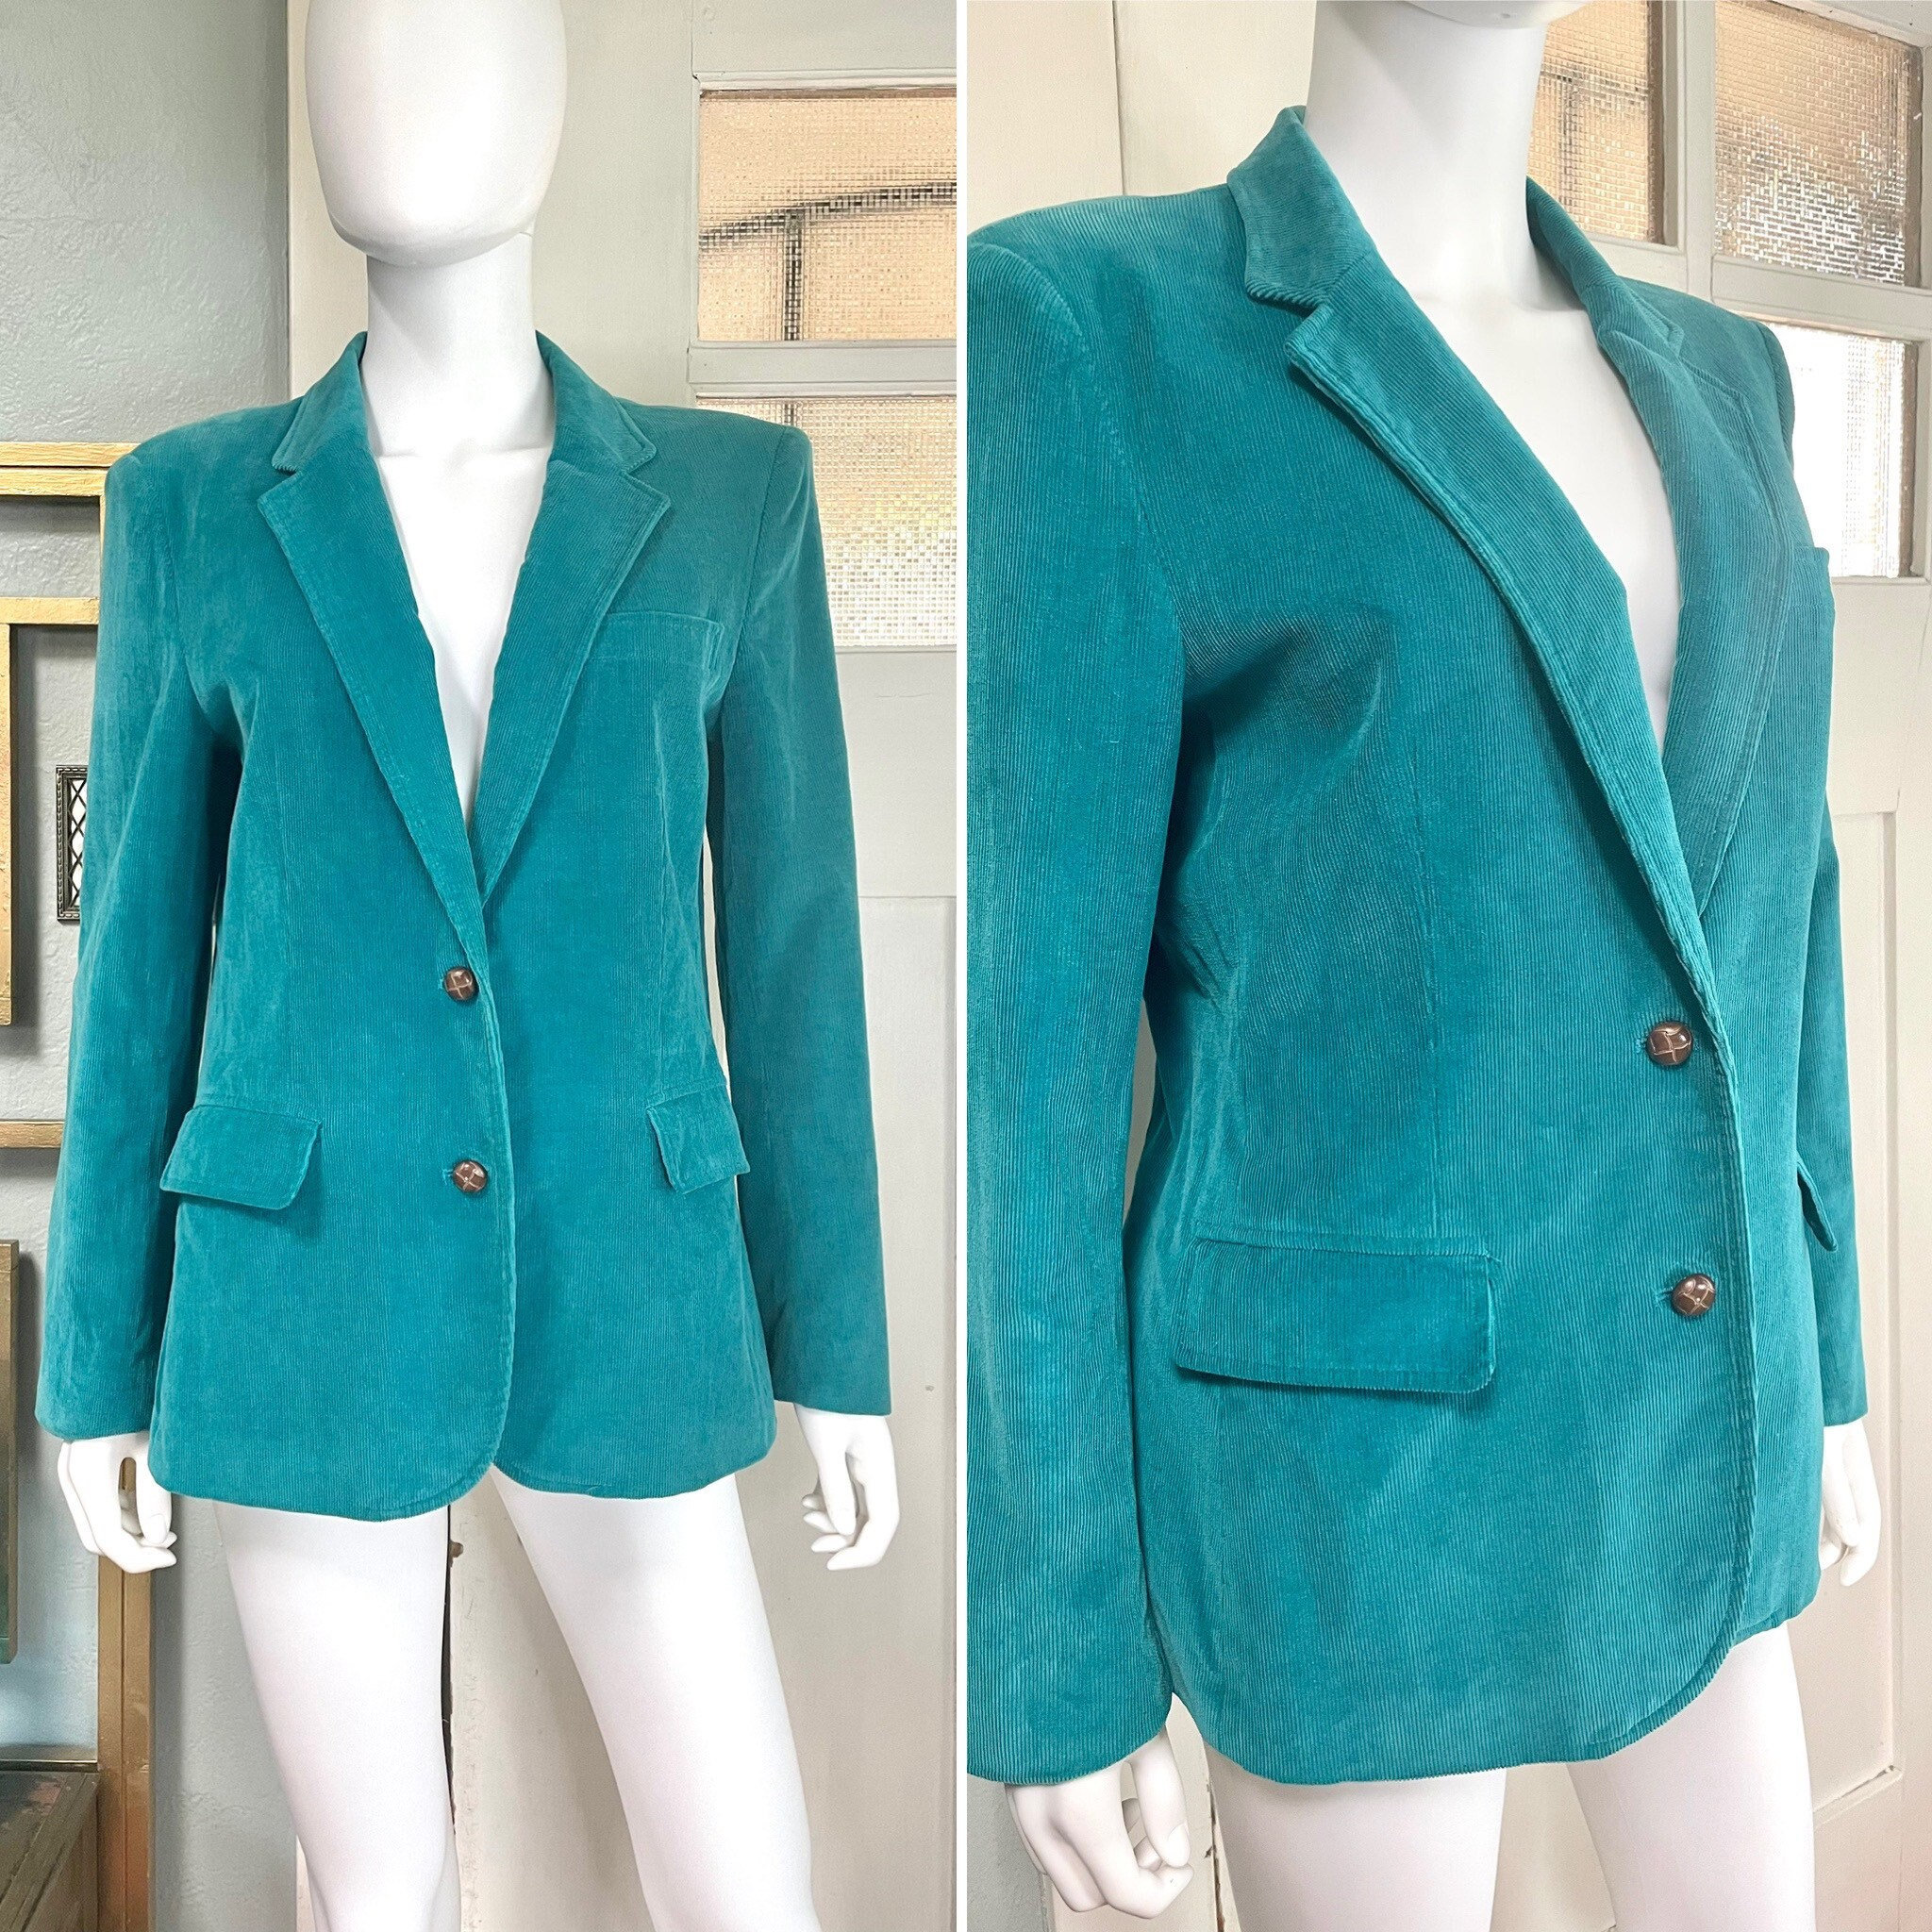 River Island soft jacquard tie waist blazer in turquoise - part of a set